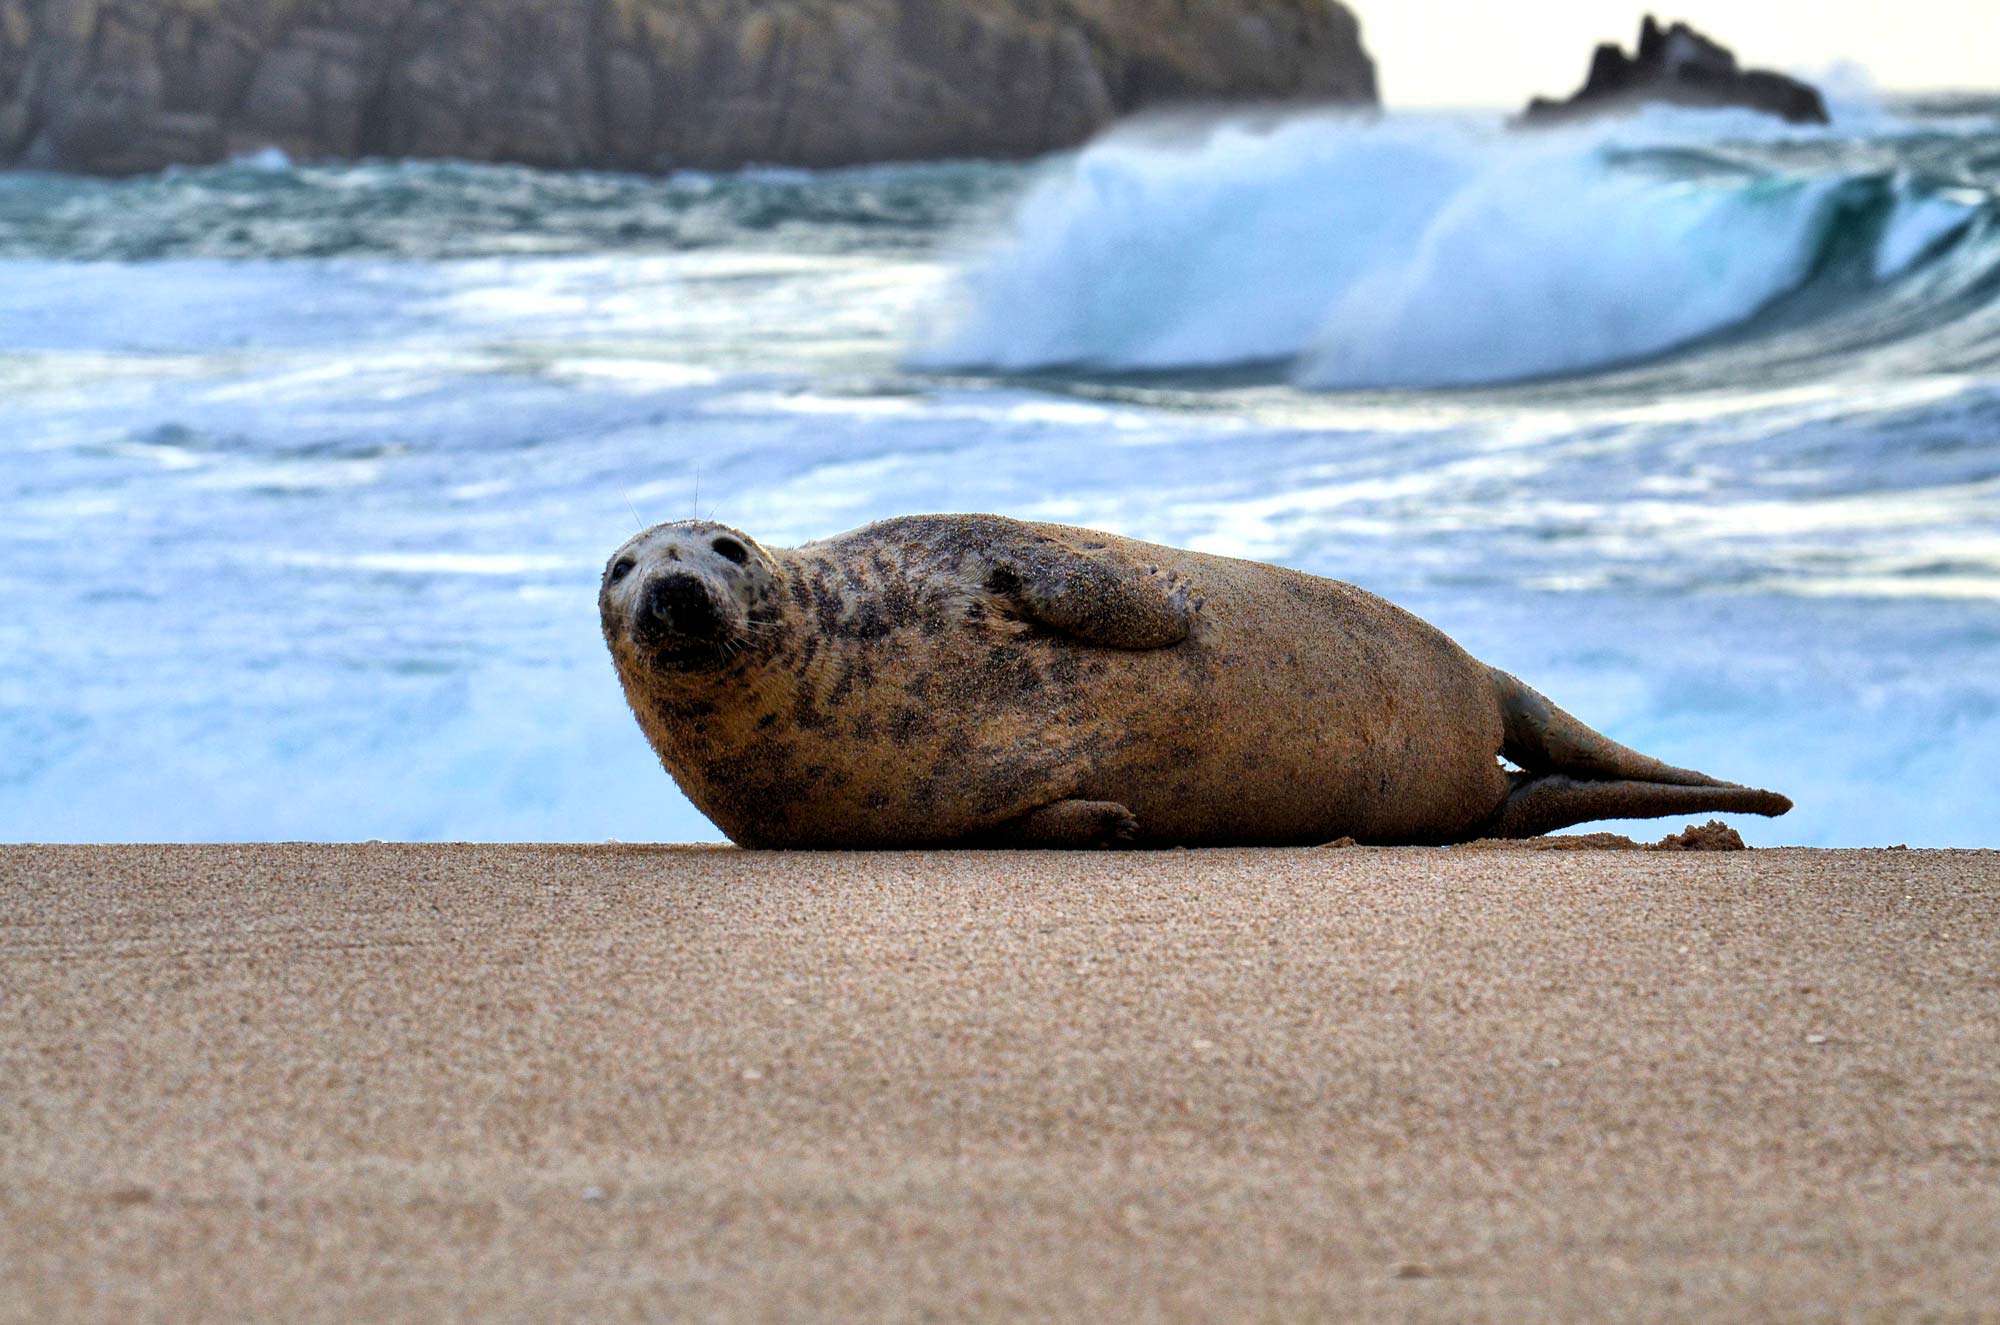 Look Out For Porthcurno's Friendly Neighbourhood Seal!